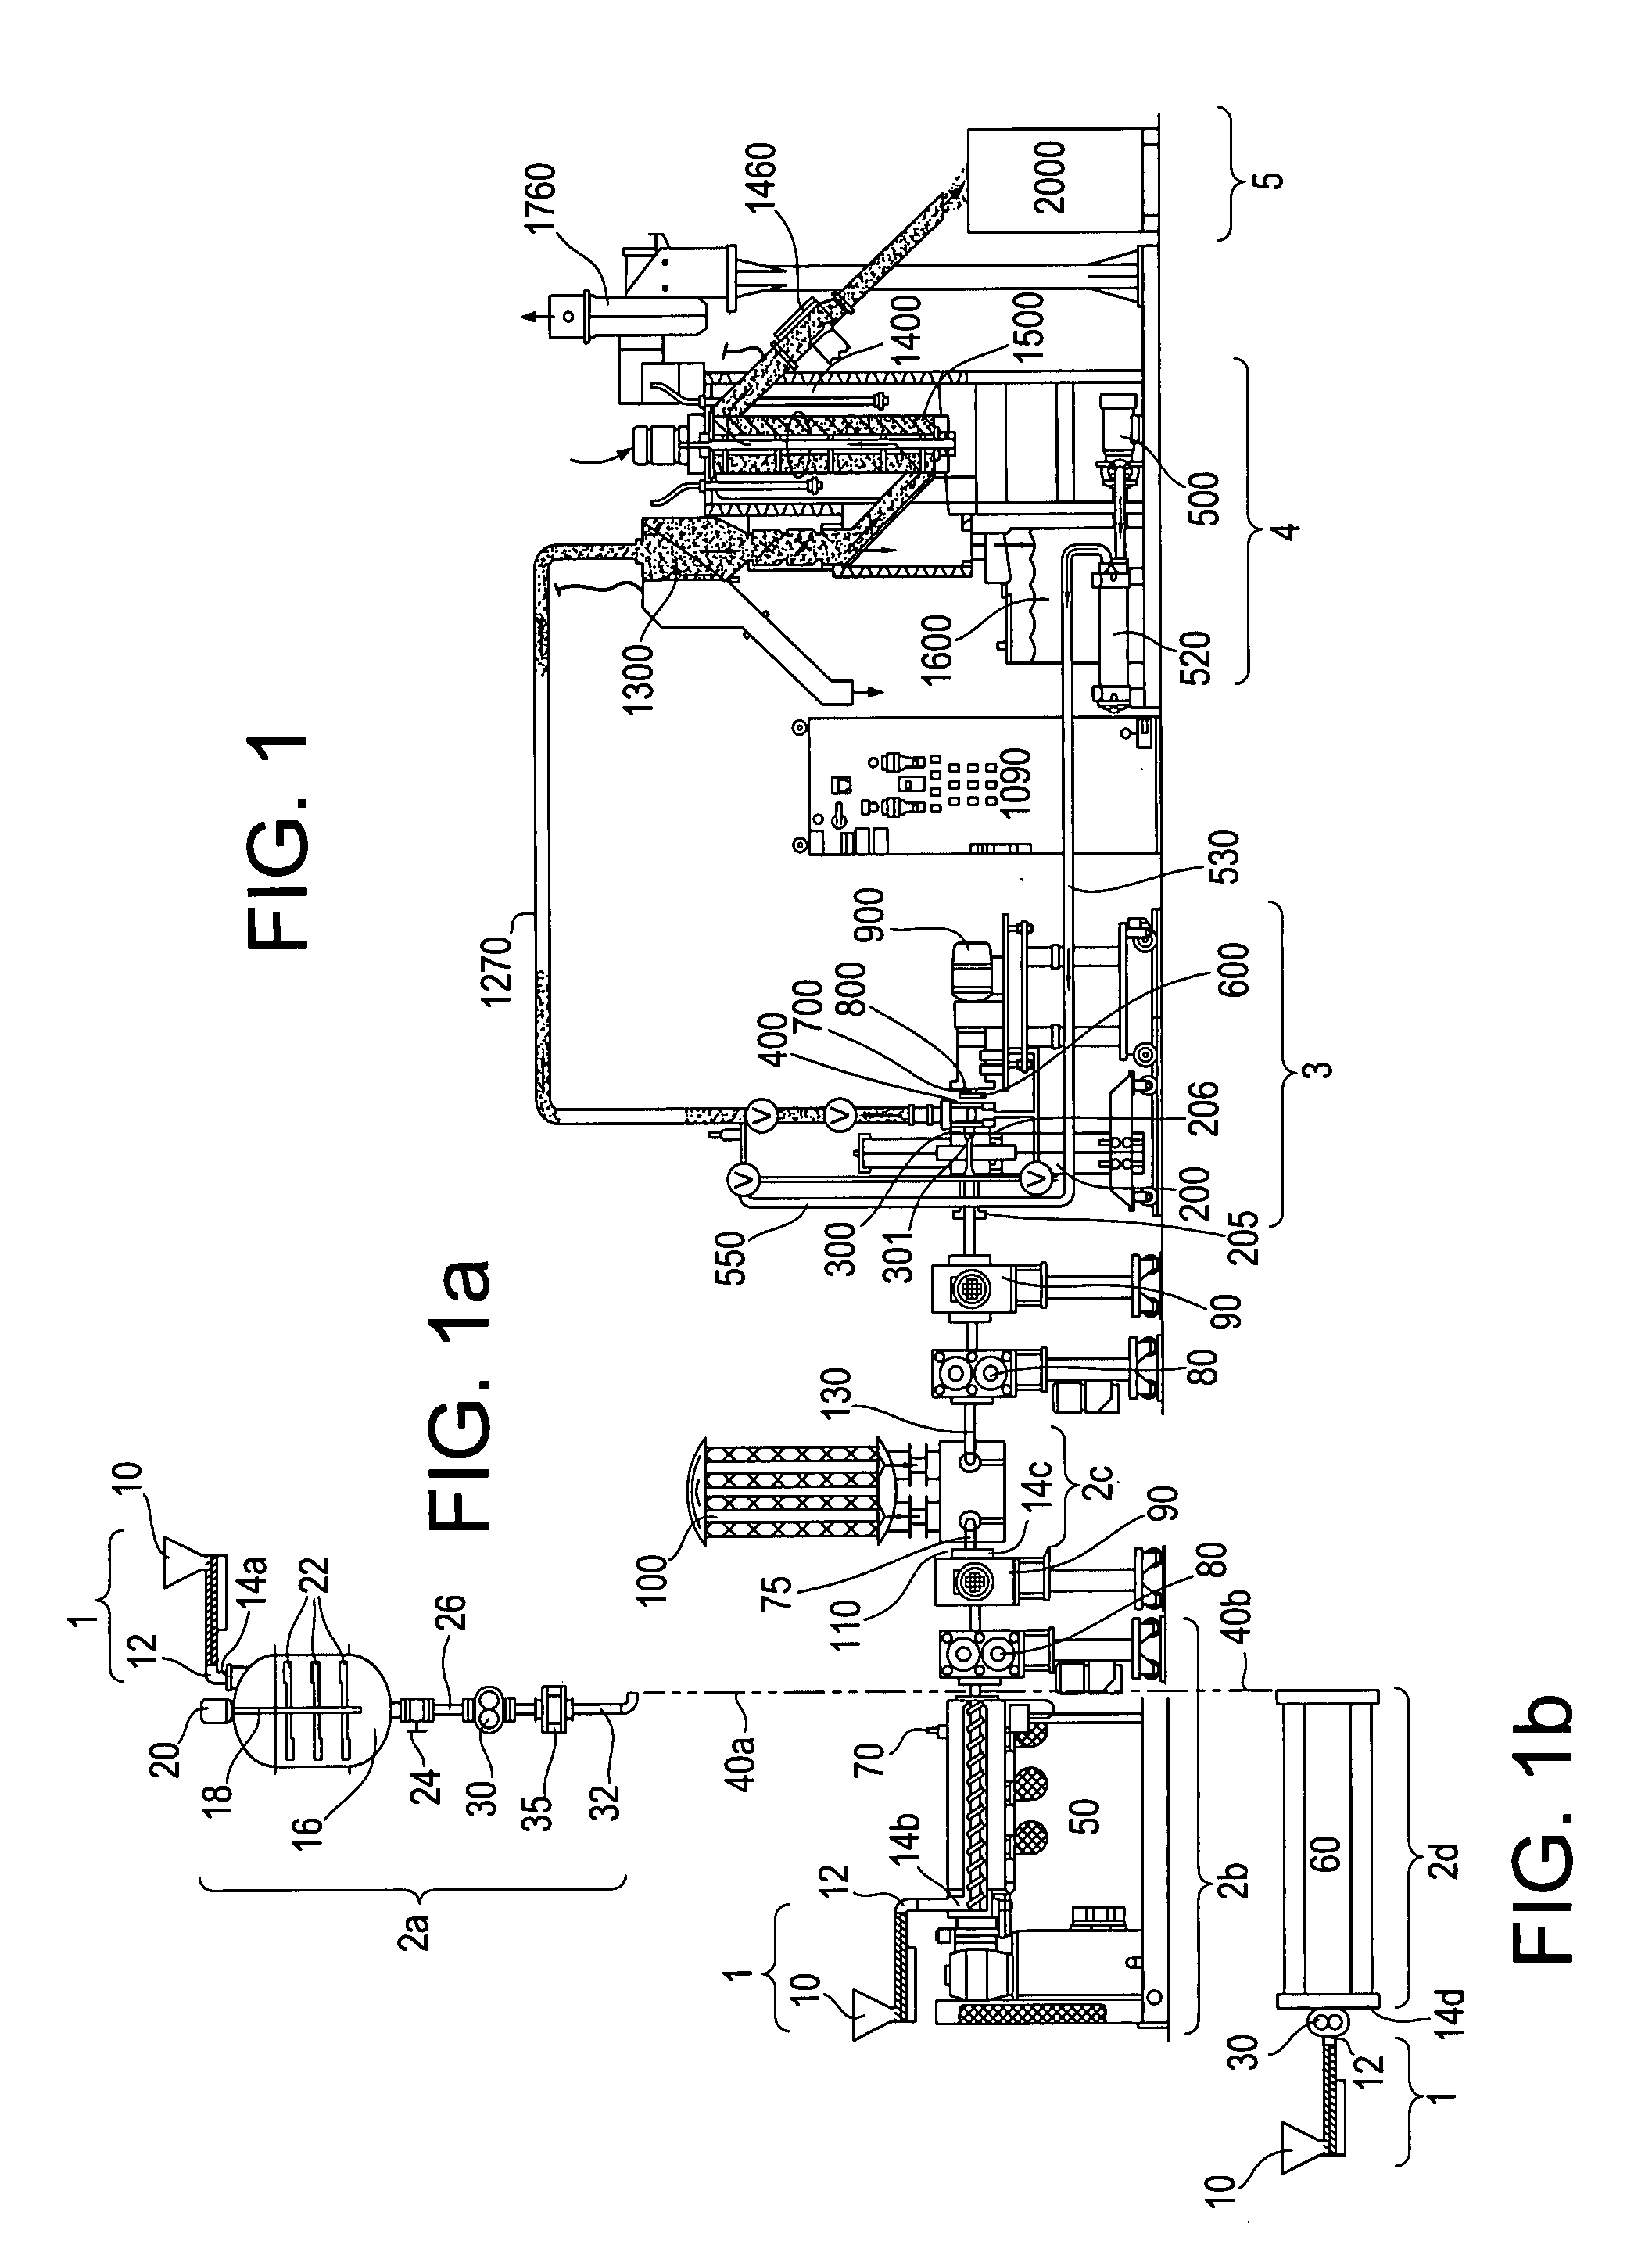 Method and apparatus for enhanced minimal shear molding utilizing extrusional, pelletization, and melt rheological control of pellets and micropellets and molded objects made therefrom